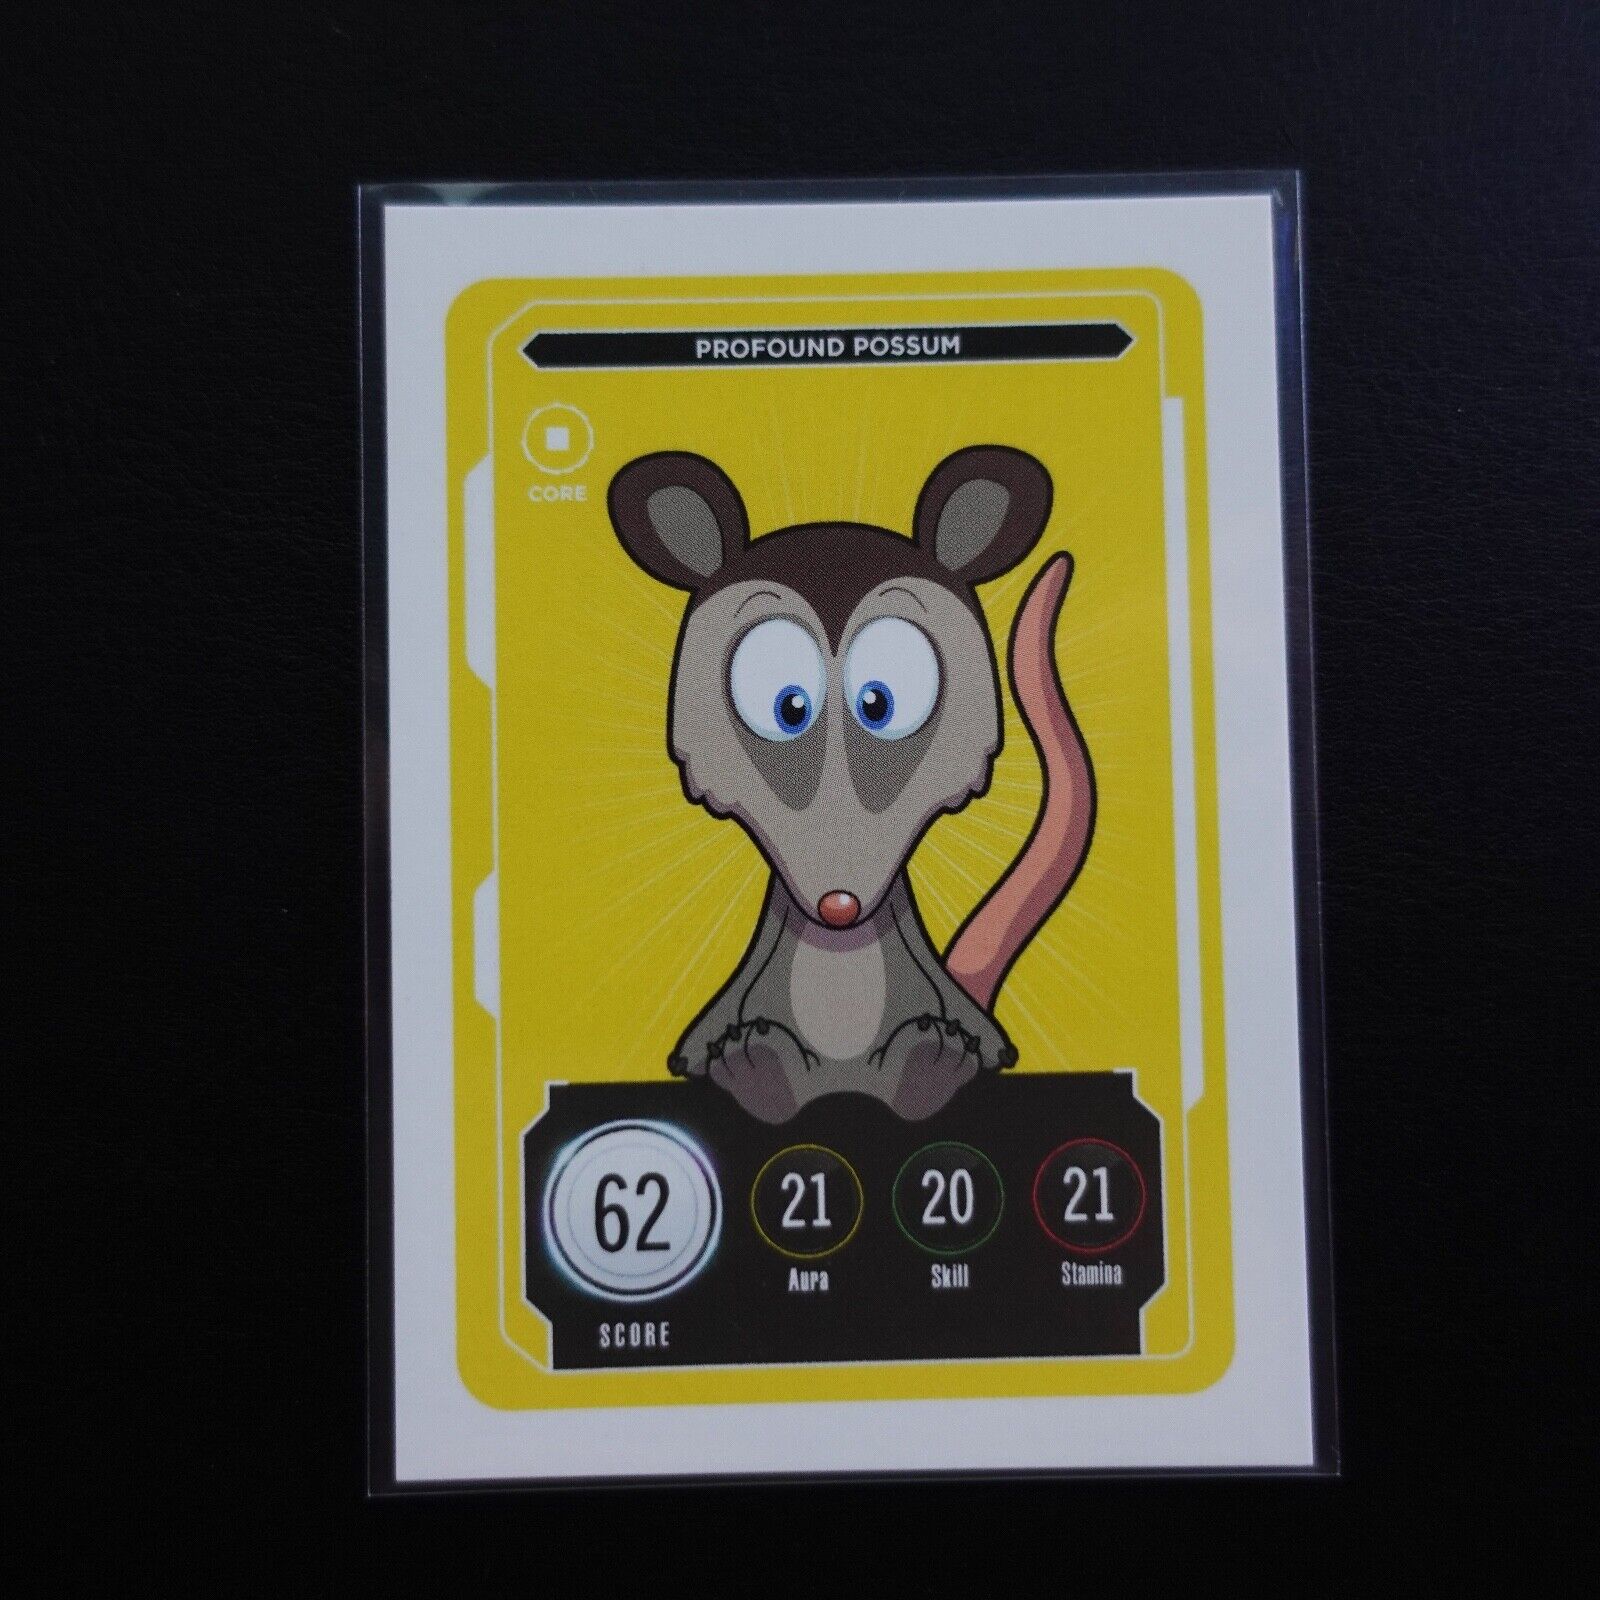 Profound Possum Veefriends Compete And Collect Series 2 Trading Card Gary Vee